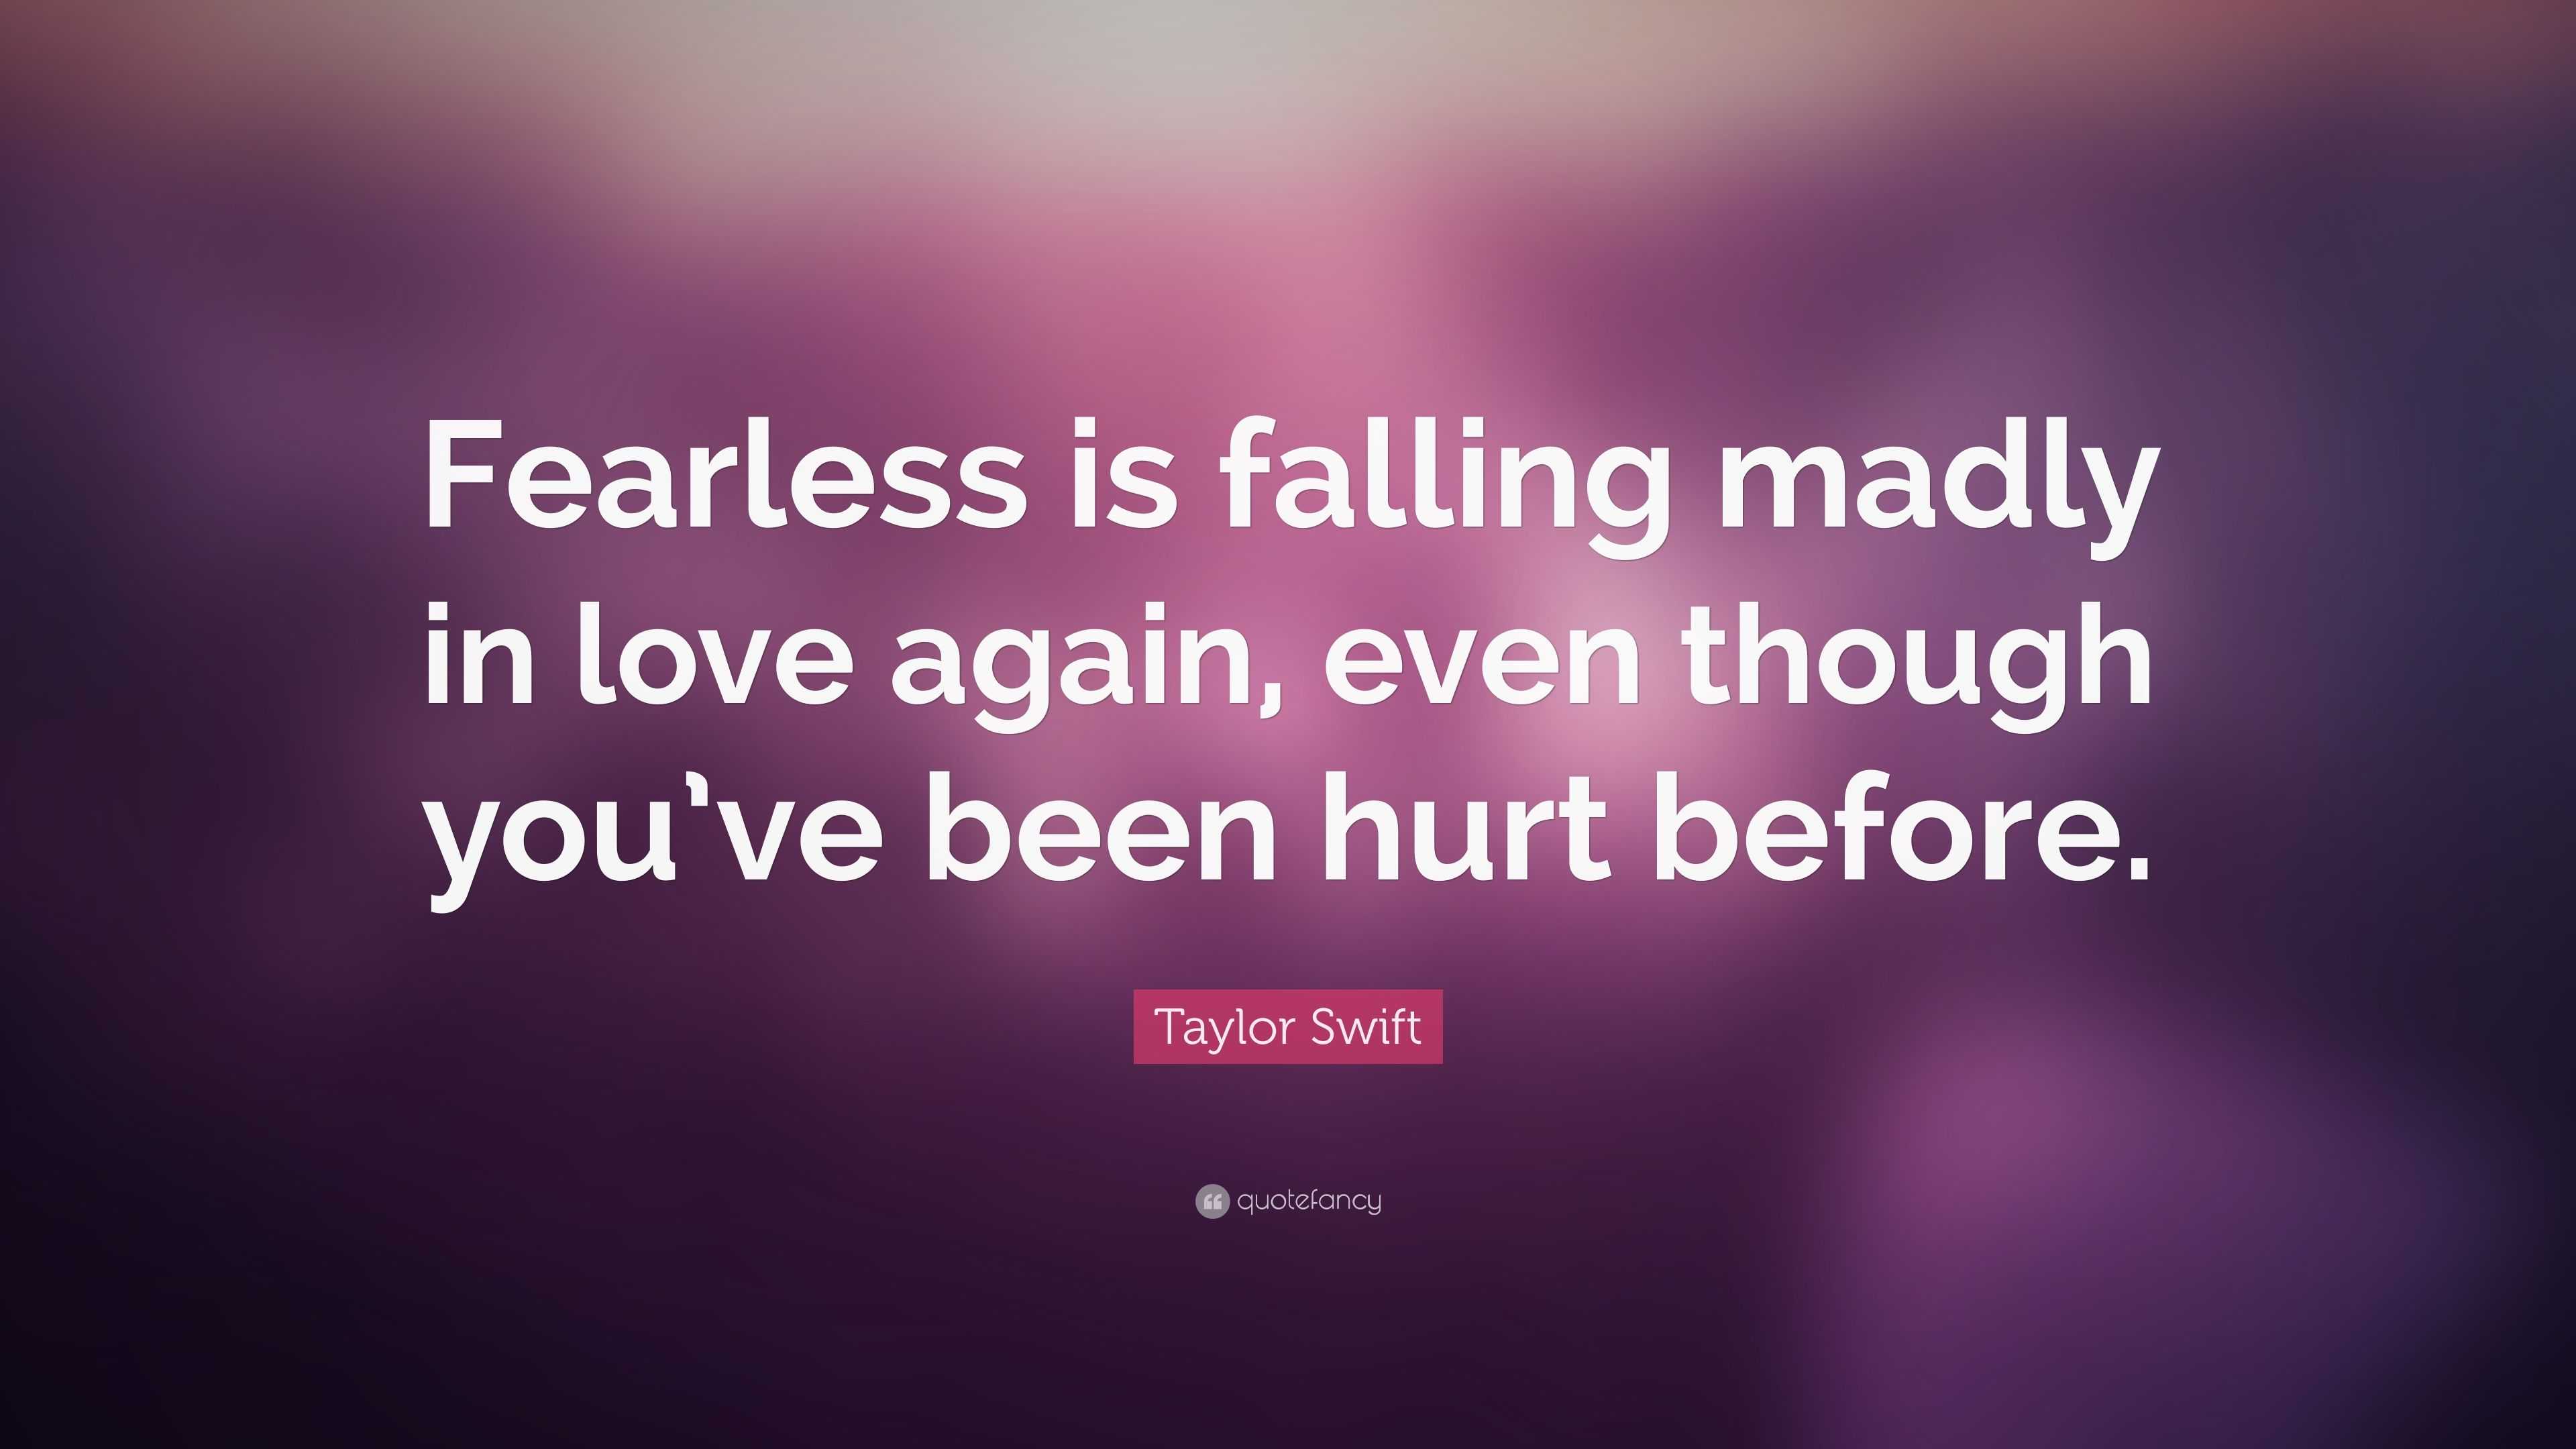 Taylor Swift Quote “Fearless is falling madly in love again even though you